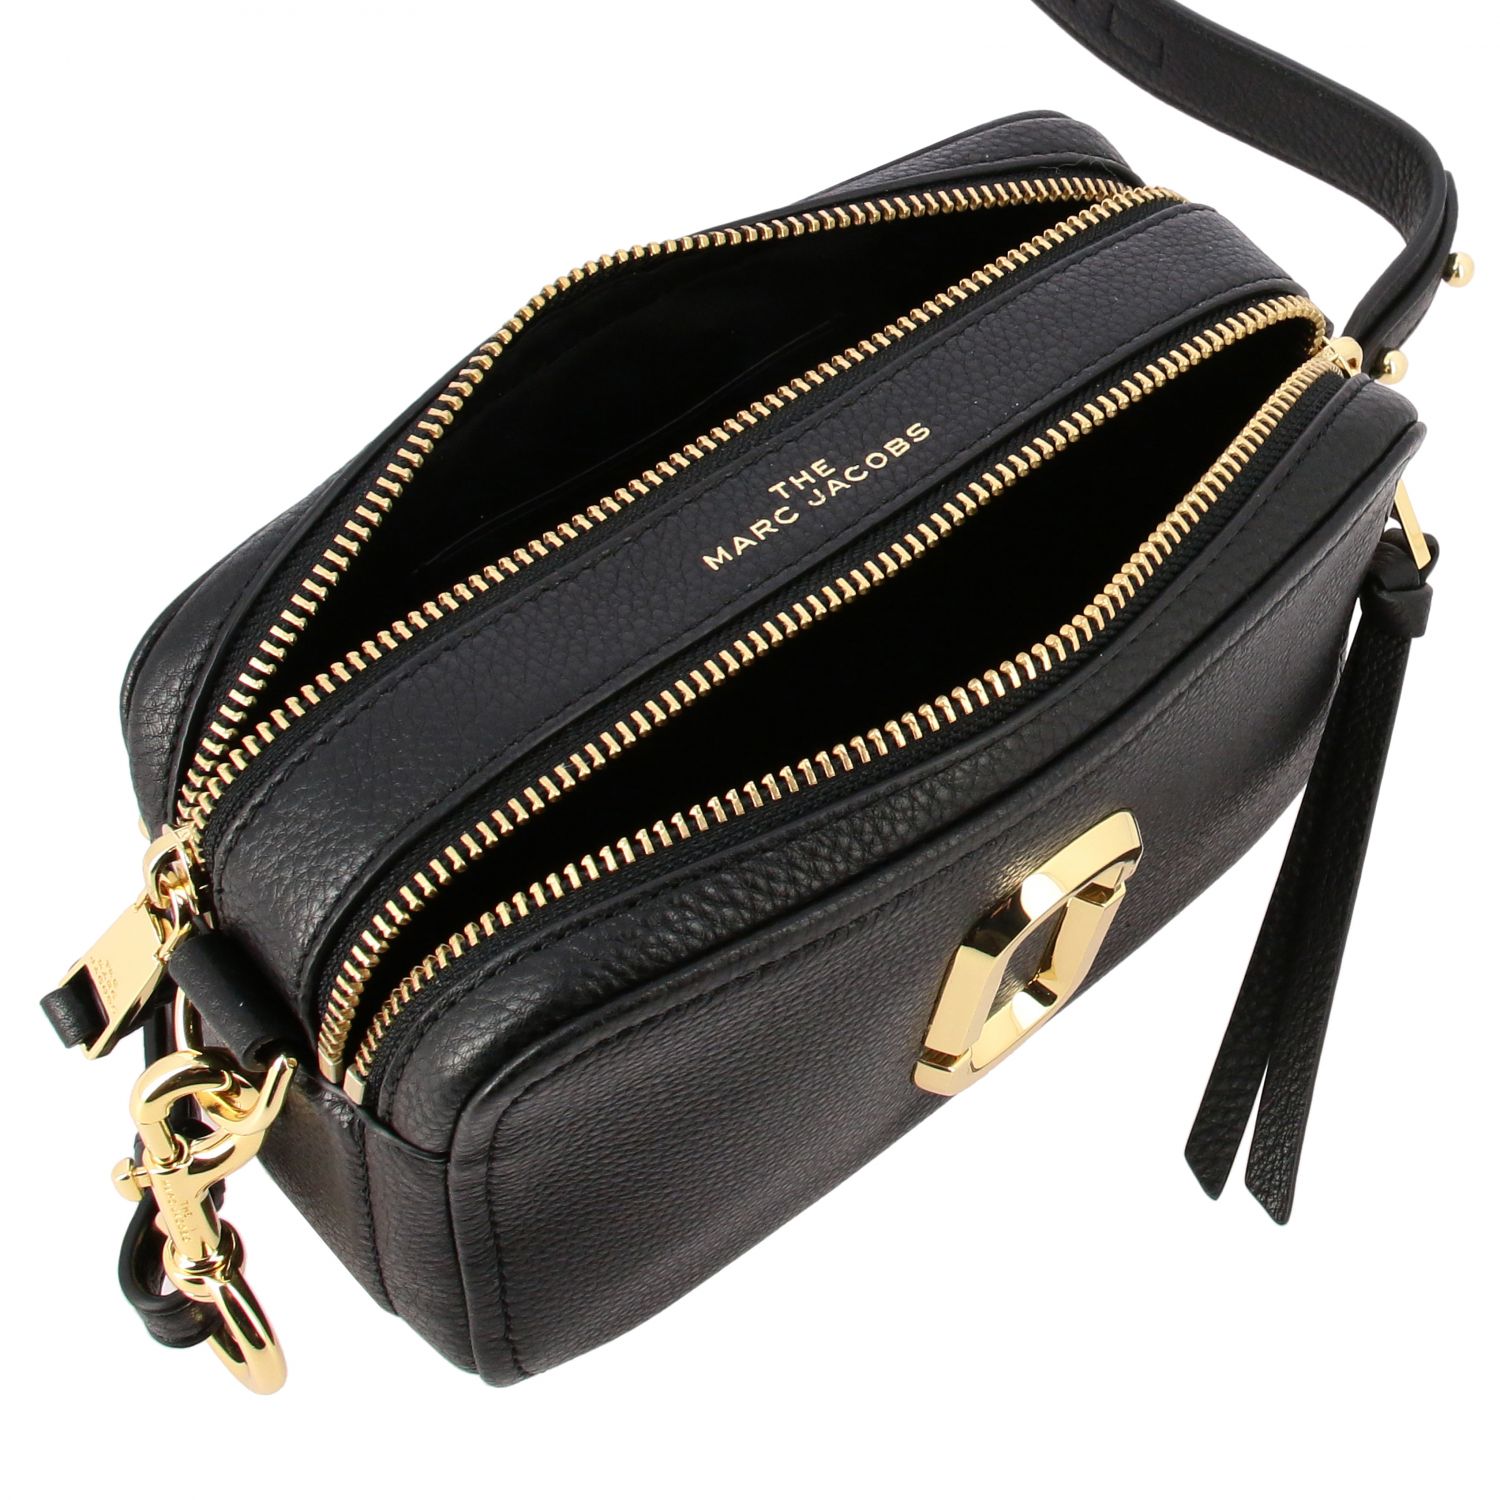 Marc Jacobs shoulder bag in textured leather with metal staple